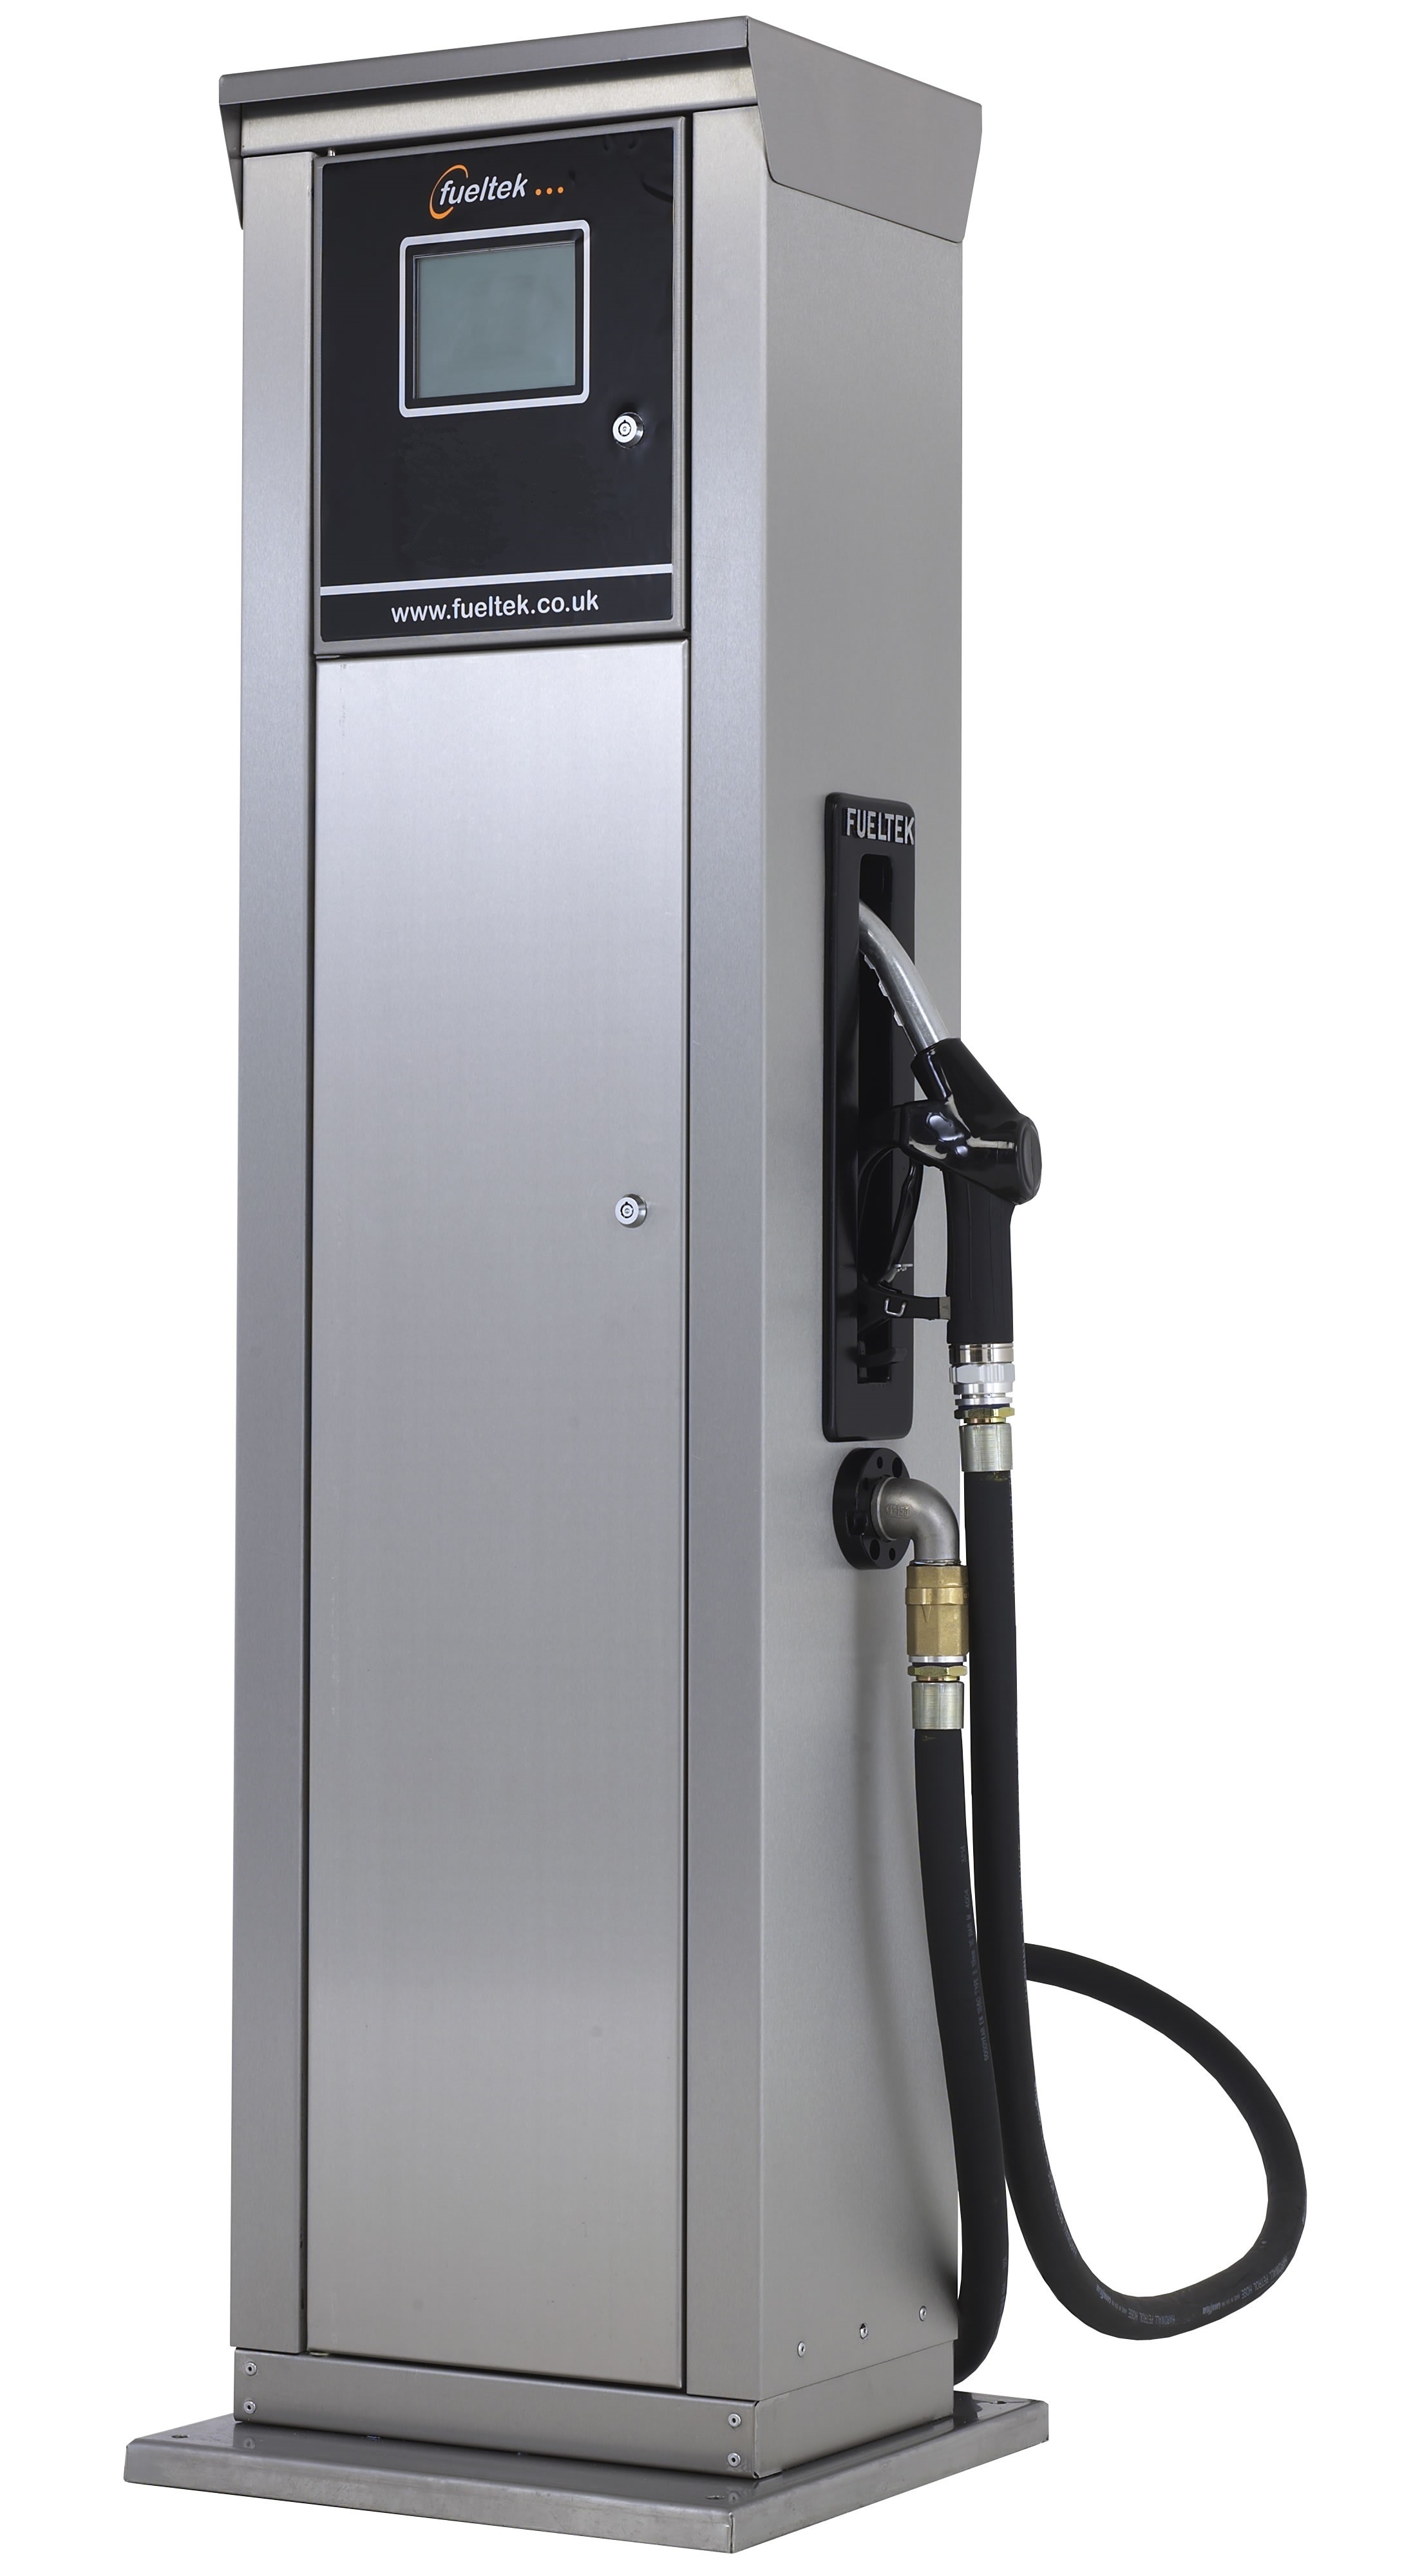 UK Designers of Commercial Fuel Dispensers